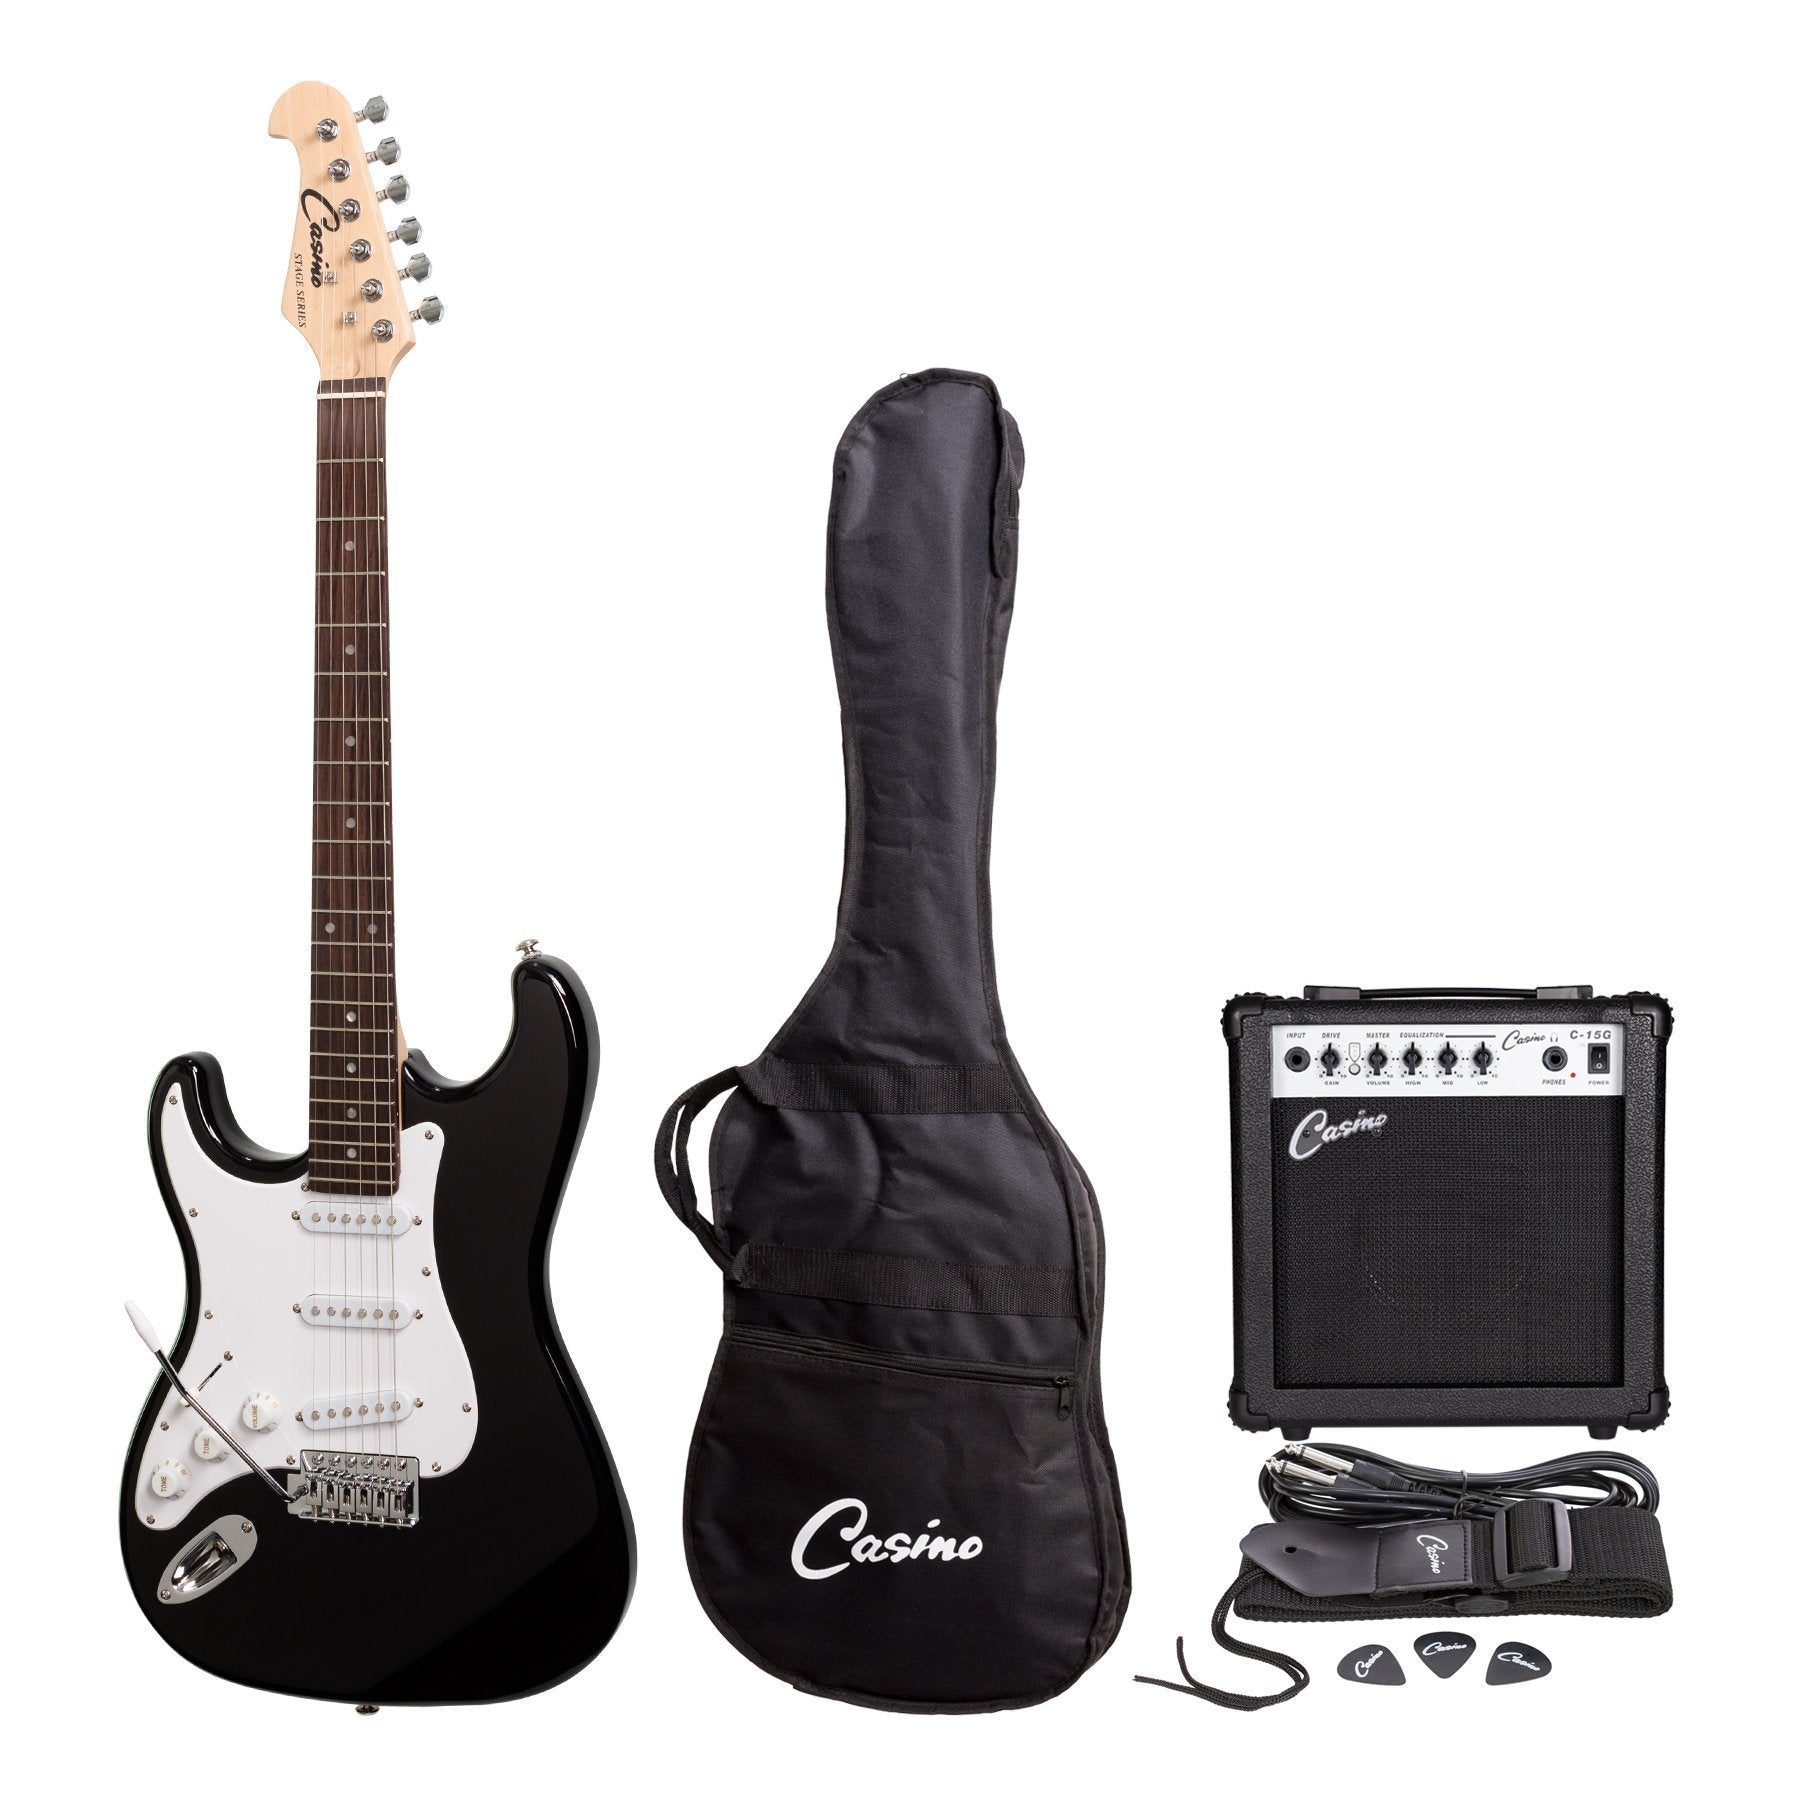 Casino ST-Style Left Handed Electric Guitar and 15 Watt Amplifier Pack (Black)-CP-E1L-BLK